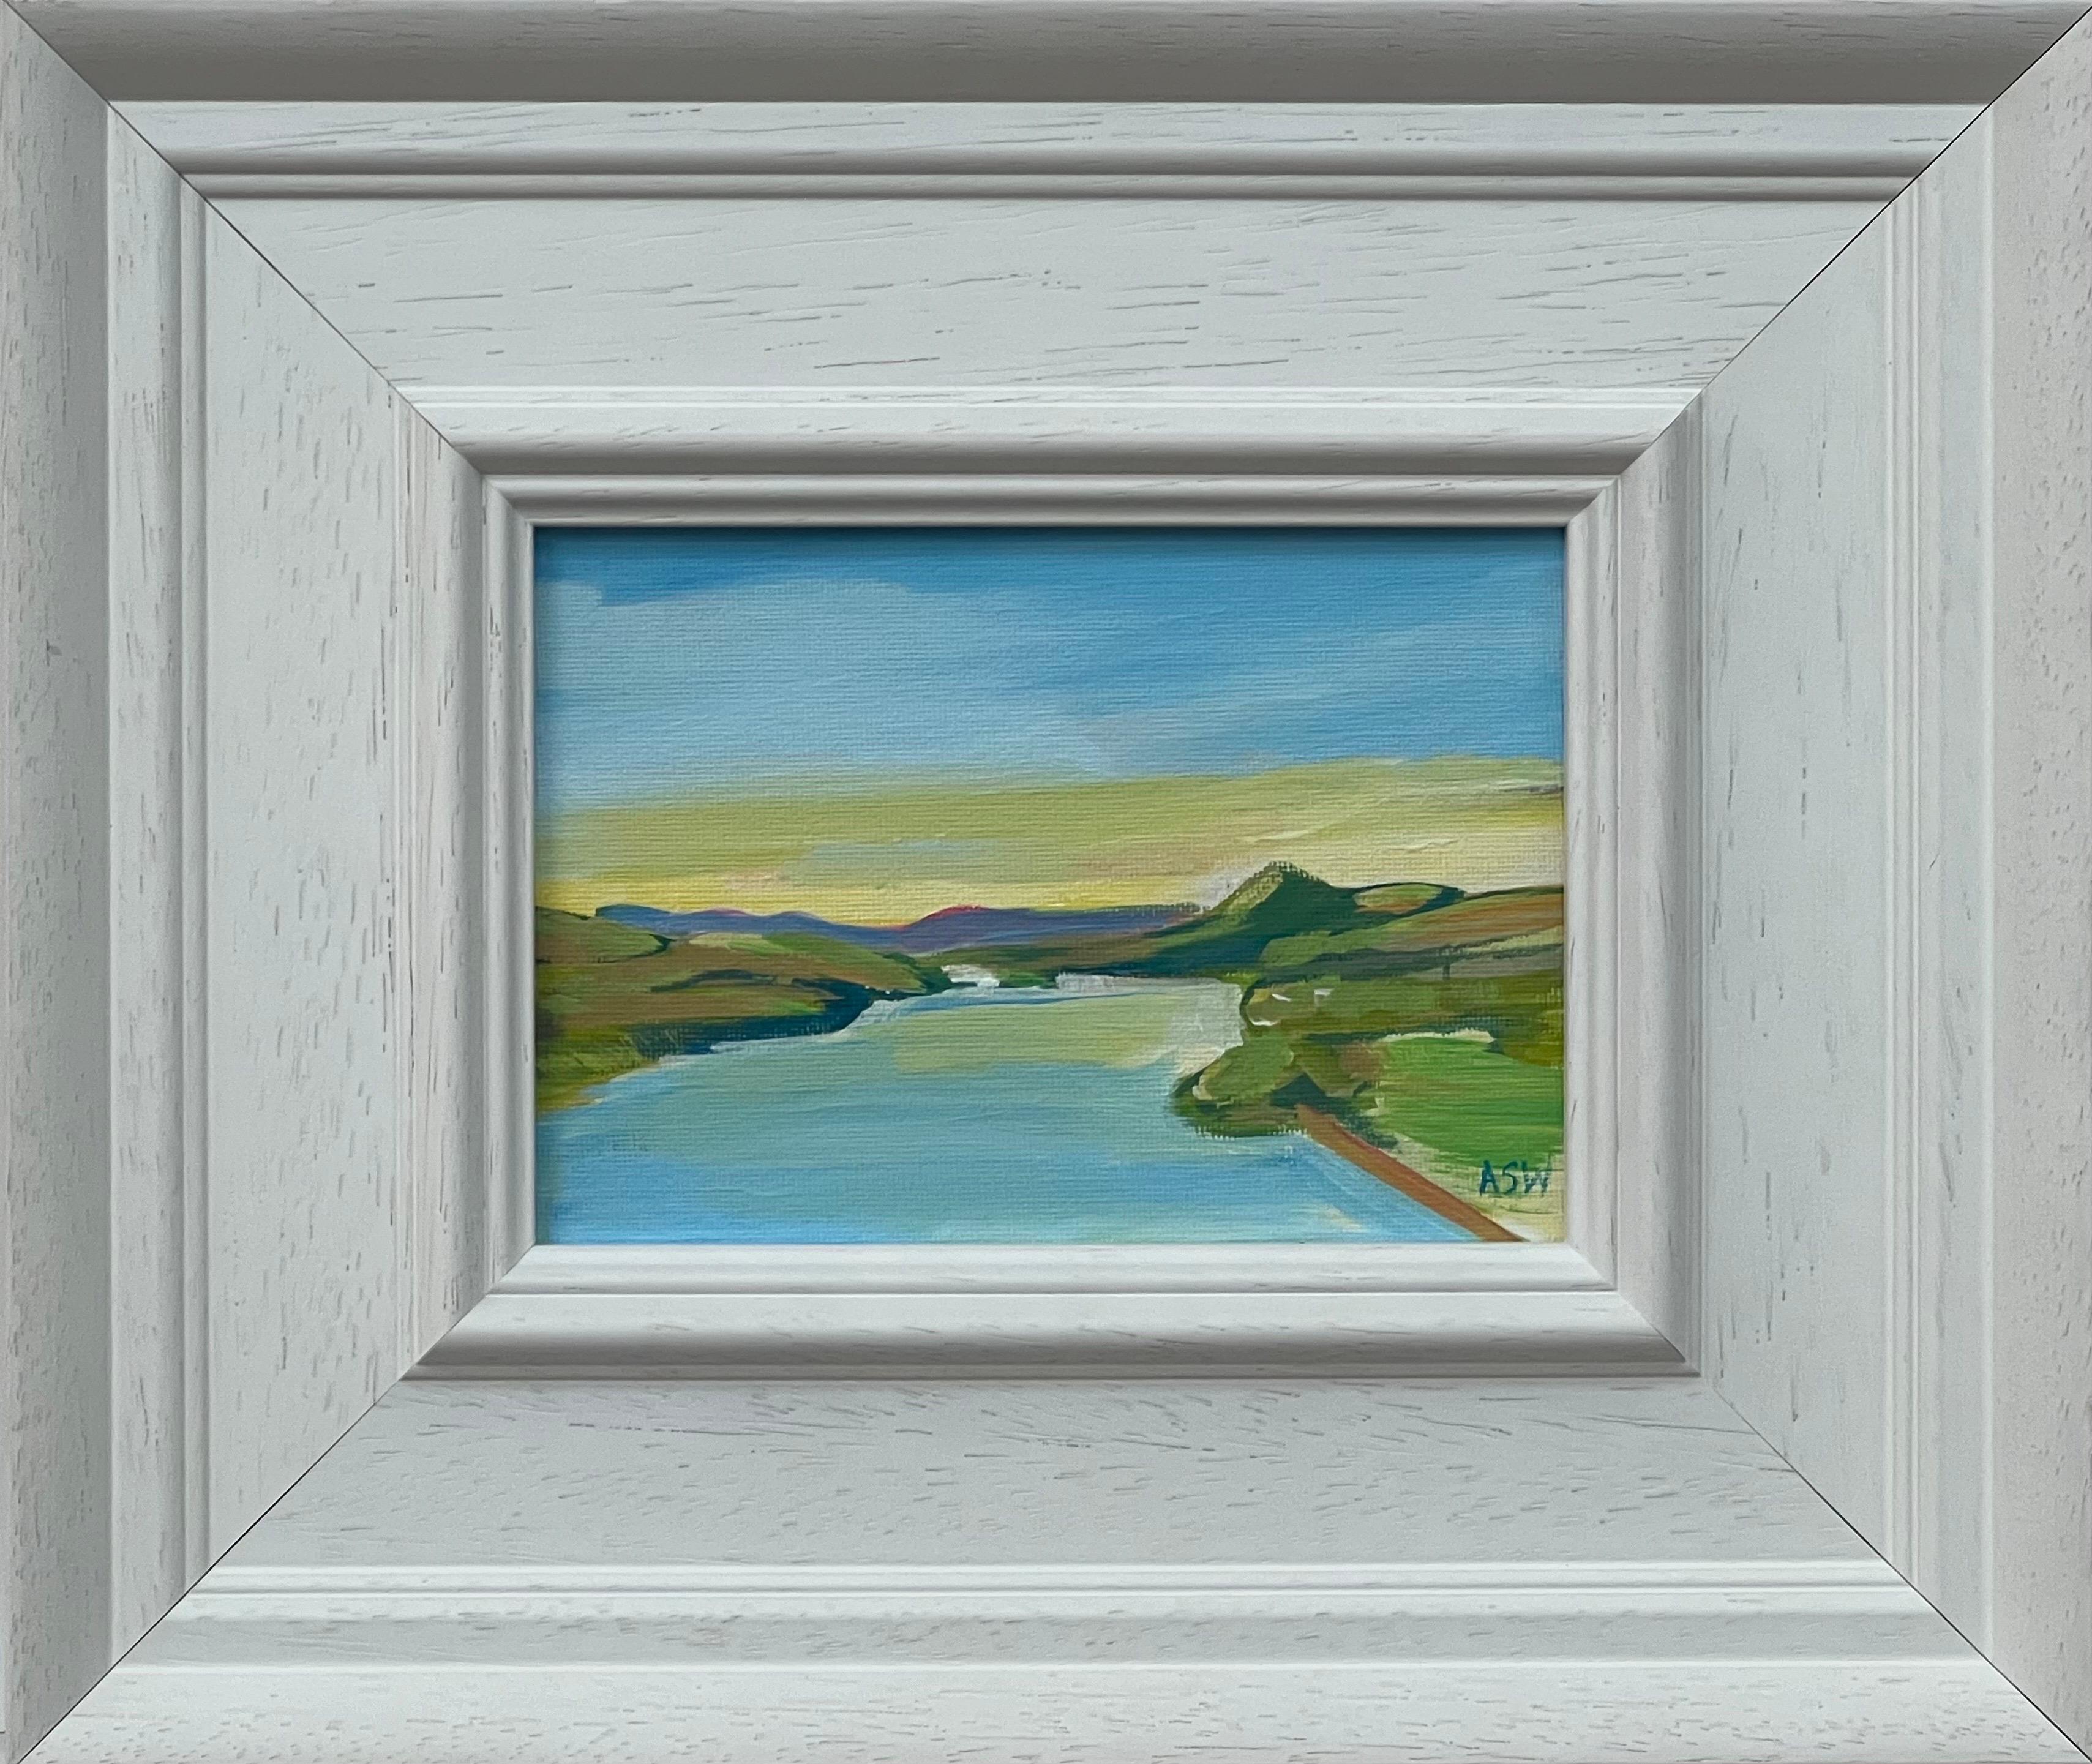 Miniature Painting Study of Hudson River, New York State, USA by British Artist